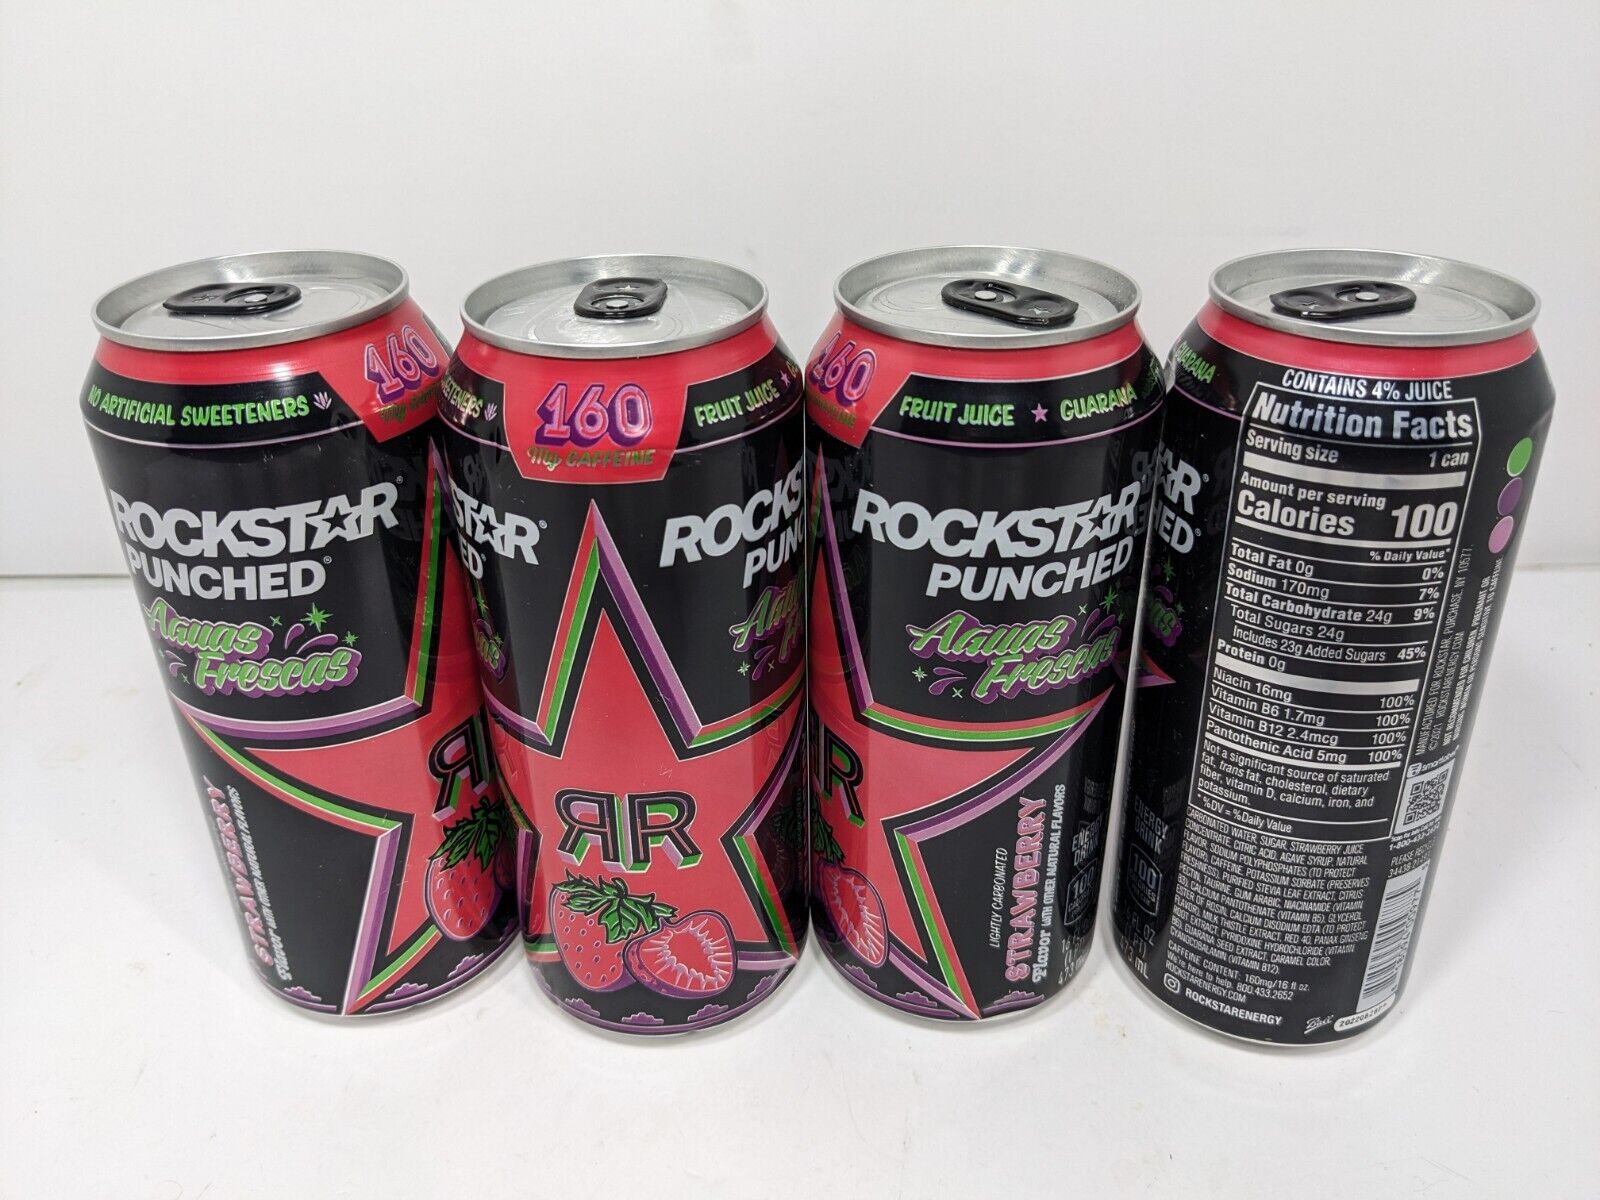 Lot Of 4 Rockstar Punched Aguas Frescas Strawberry - Discontinued - BBD 9-2022